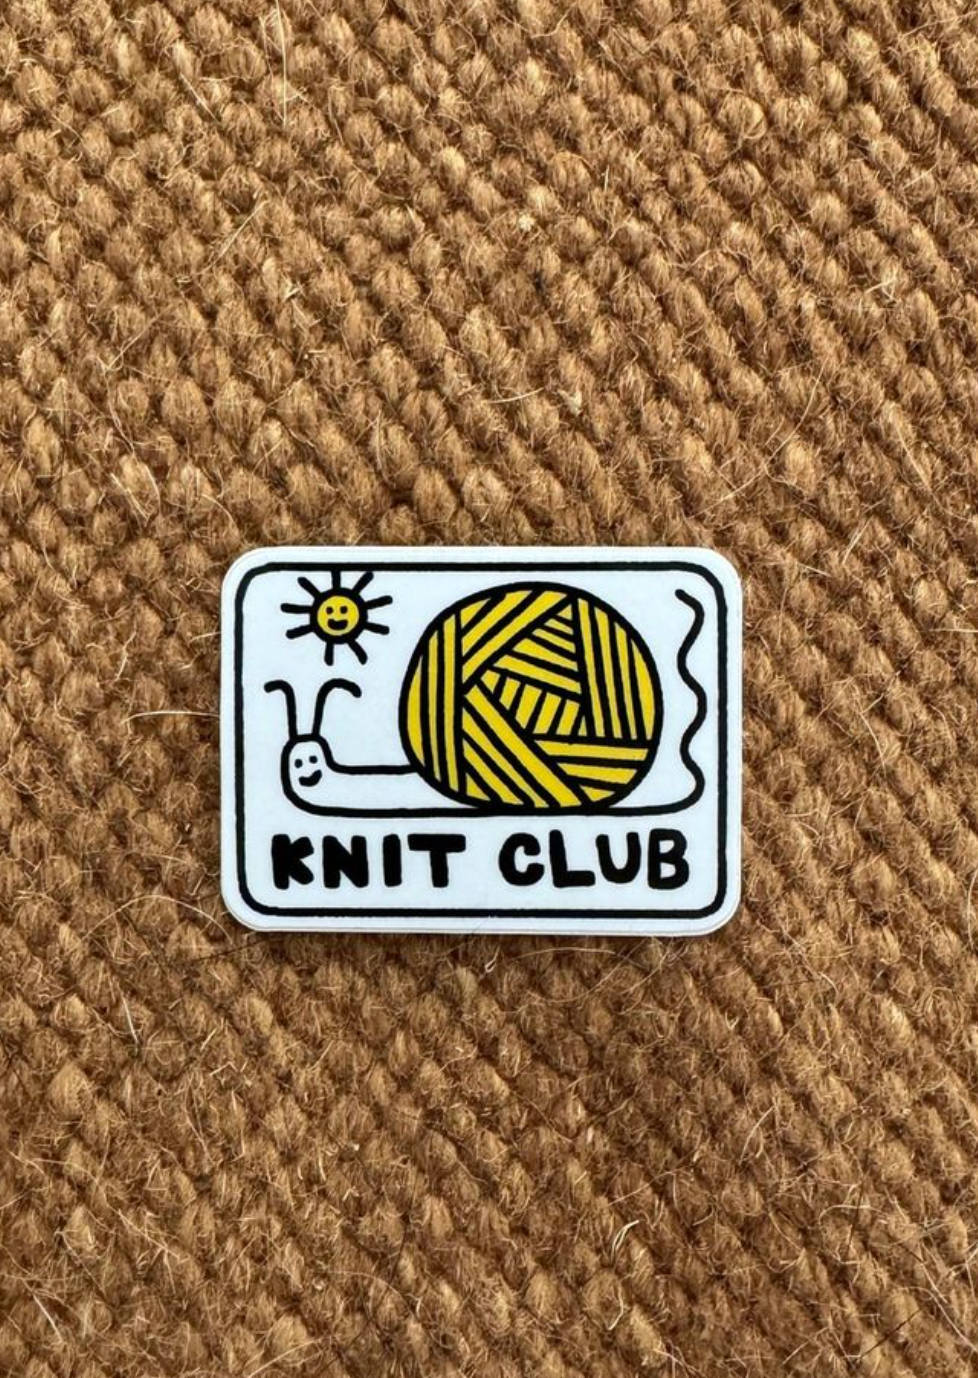 Support KNIT CLUB HQ with a Sticker!